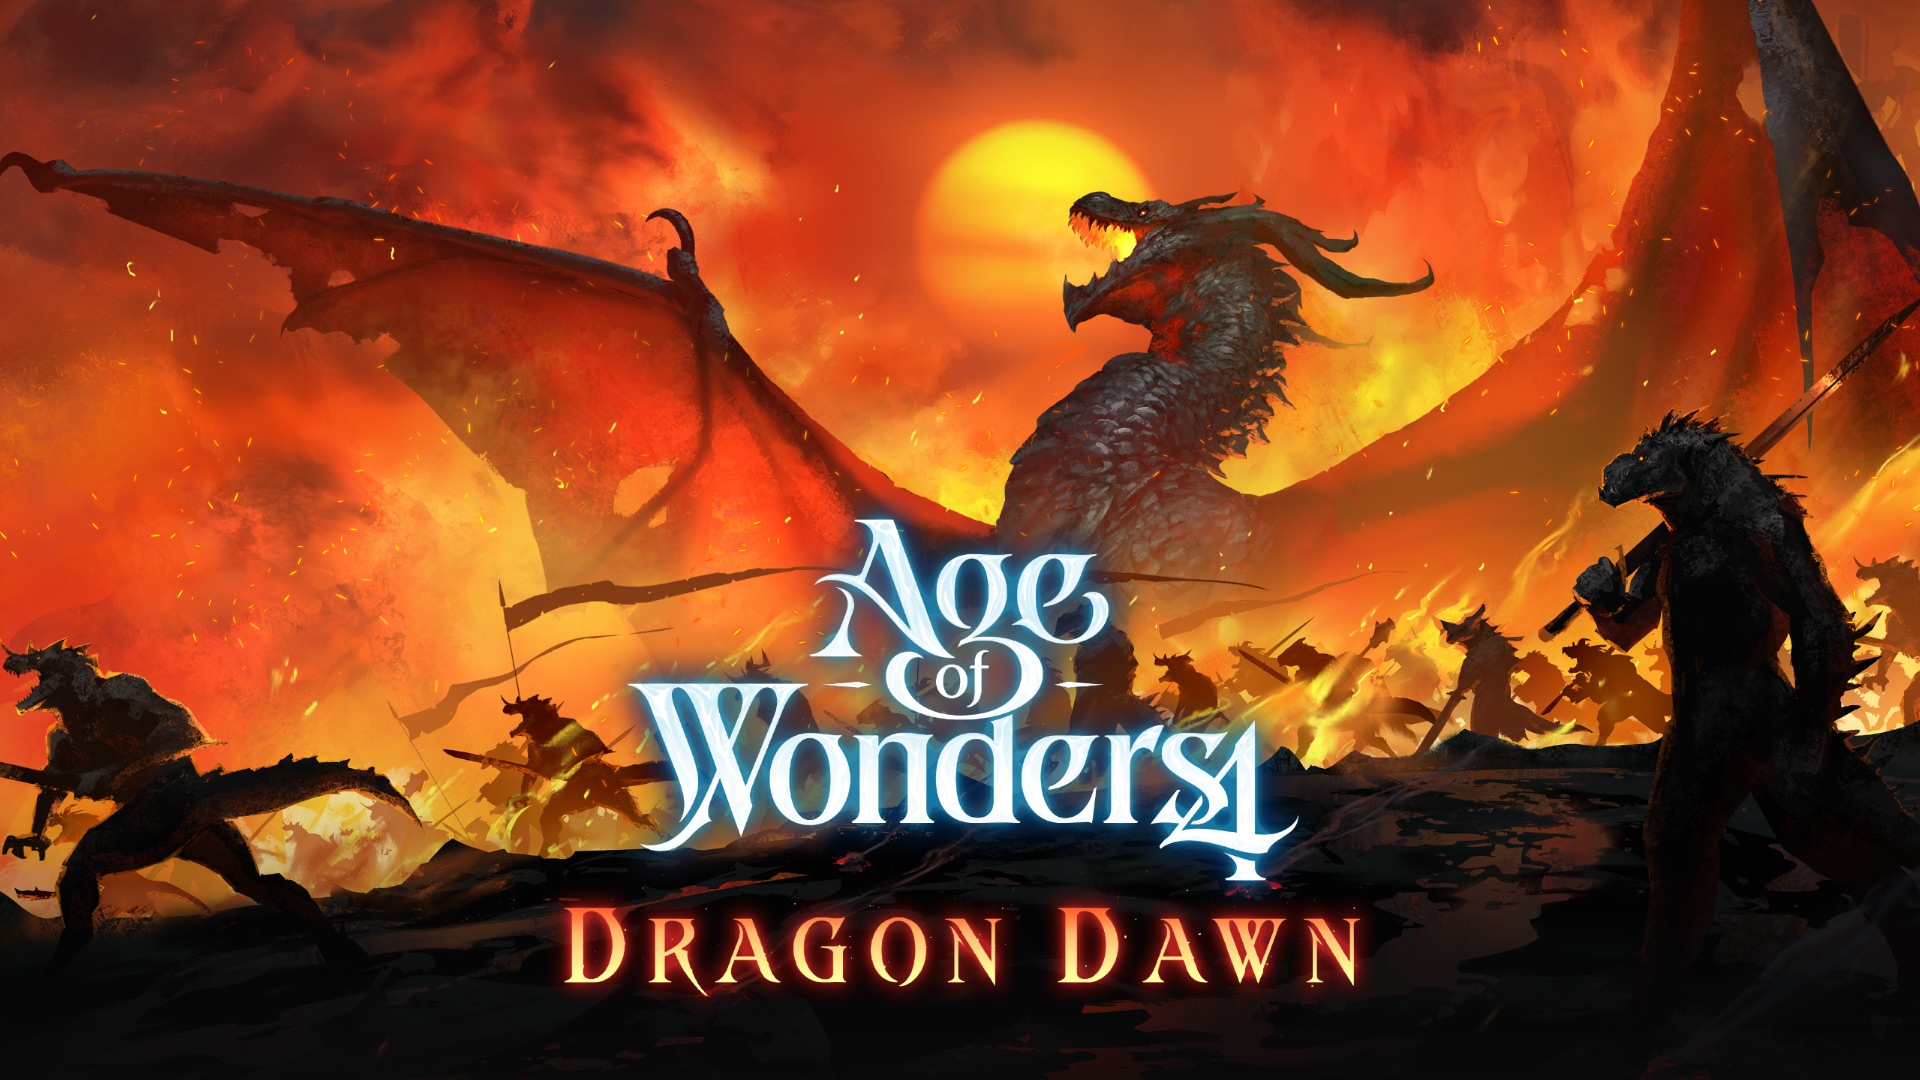 https://gaming-cdn.com/images/products/14414/orig/age-of-wonders-4-dragon-dawn-pc-game-steam-cover.jpg?v=1697467228